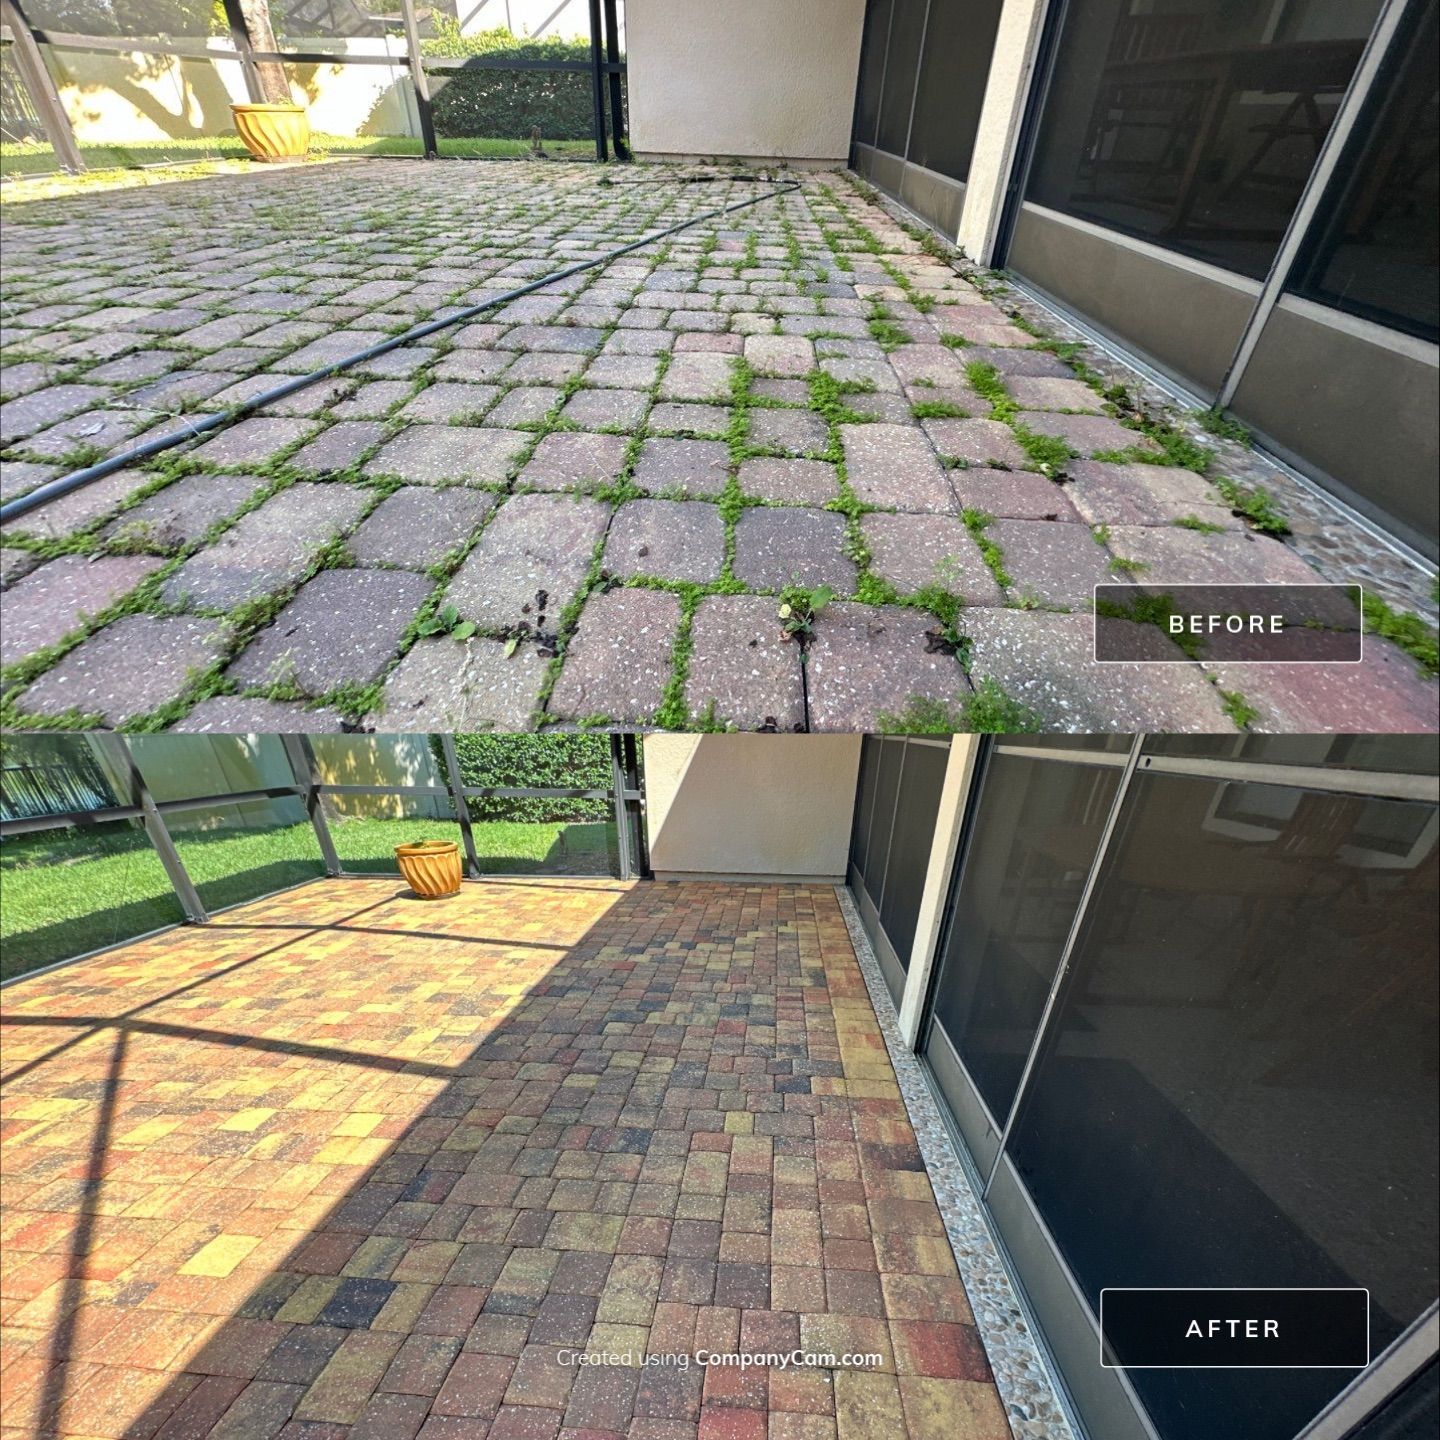 Revitalizing Beauty: Paver, Driveway, and Sidewalk Cleaning in St. Augustine with Express Clean 360